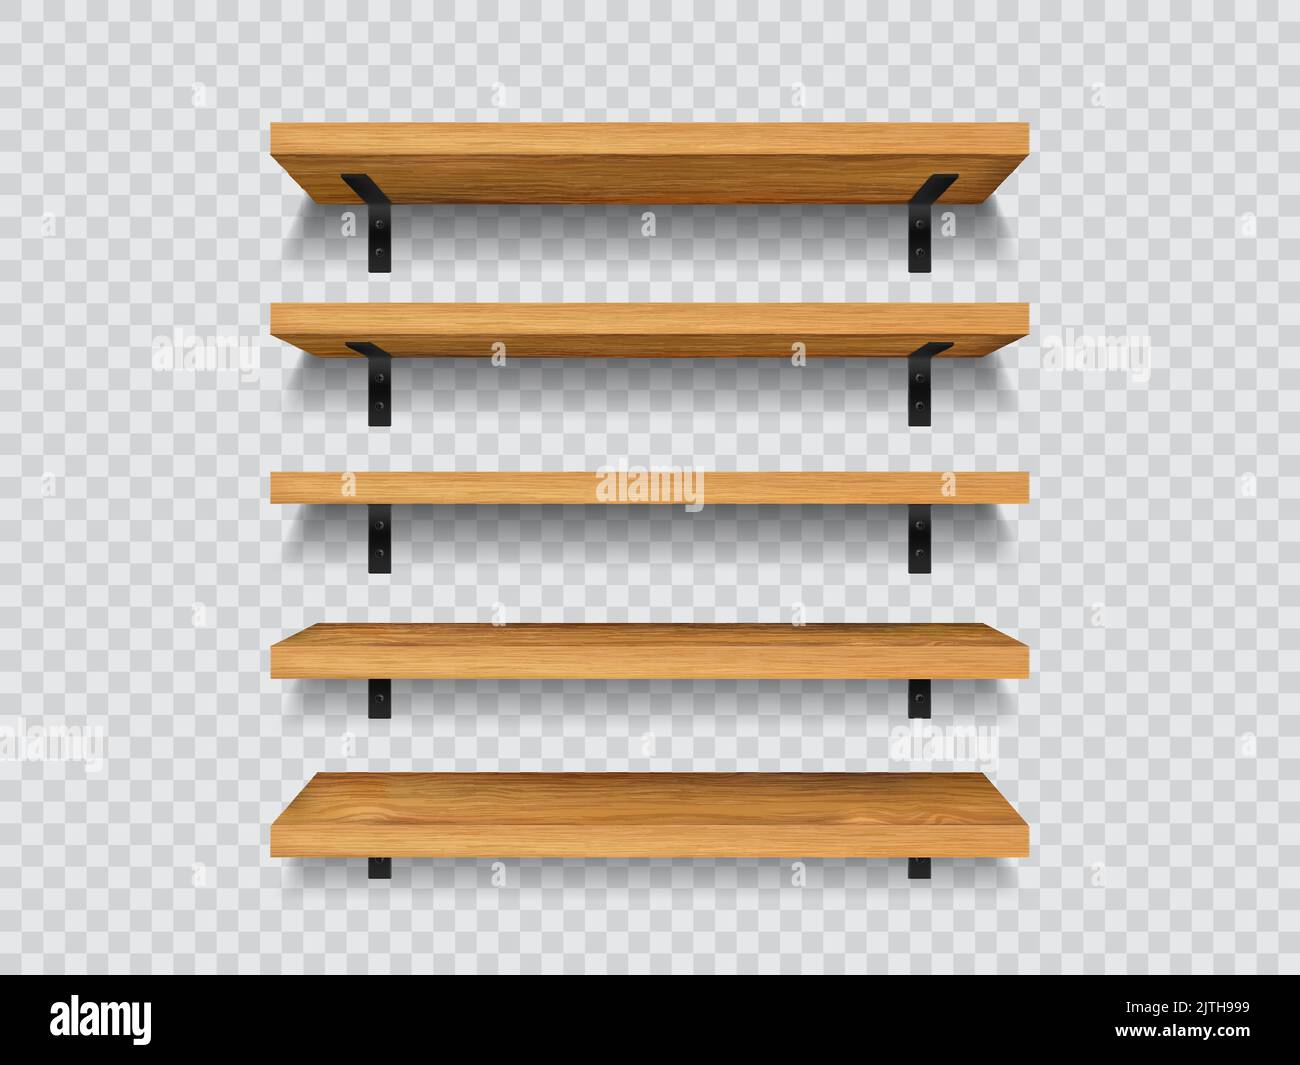 Wooden store shelves, 3d vector empty bookshelves hanging on wall. Brown timber planks for storage or gallery exhibition. Wood rack for food grocery products, books. Realistic stand mockup Stock Vector